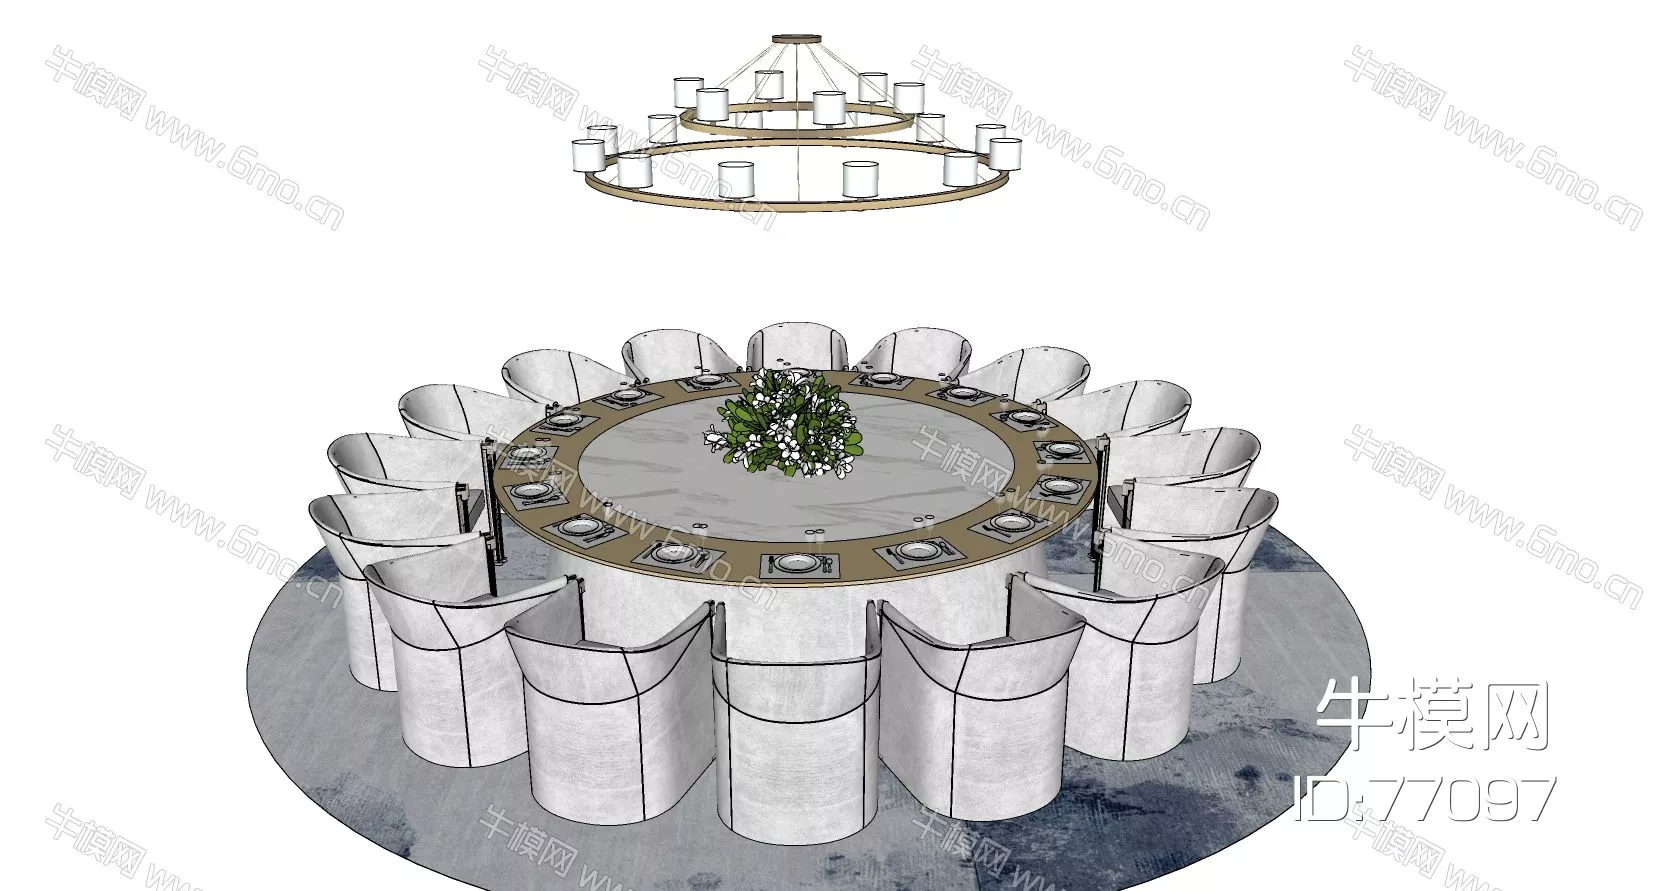 CHINESE DINING TABLE SET - SKETCHUP 3D MODEL - ENSCAPE - 77097